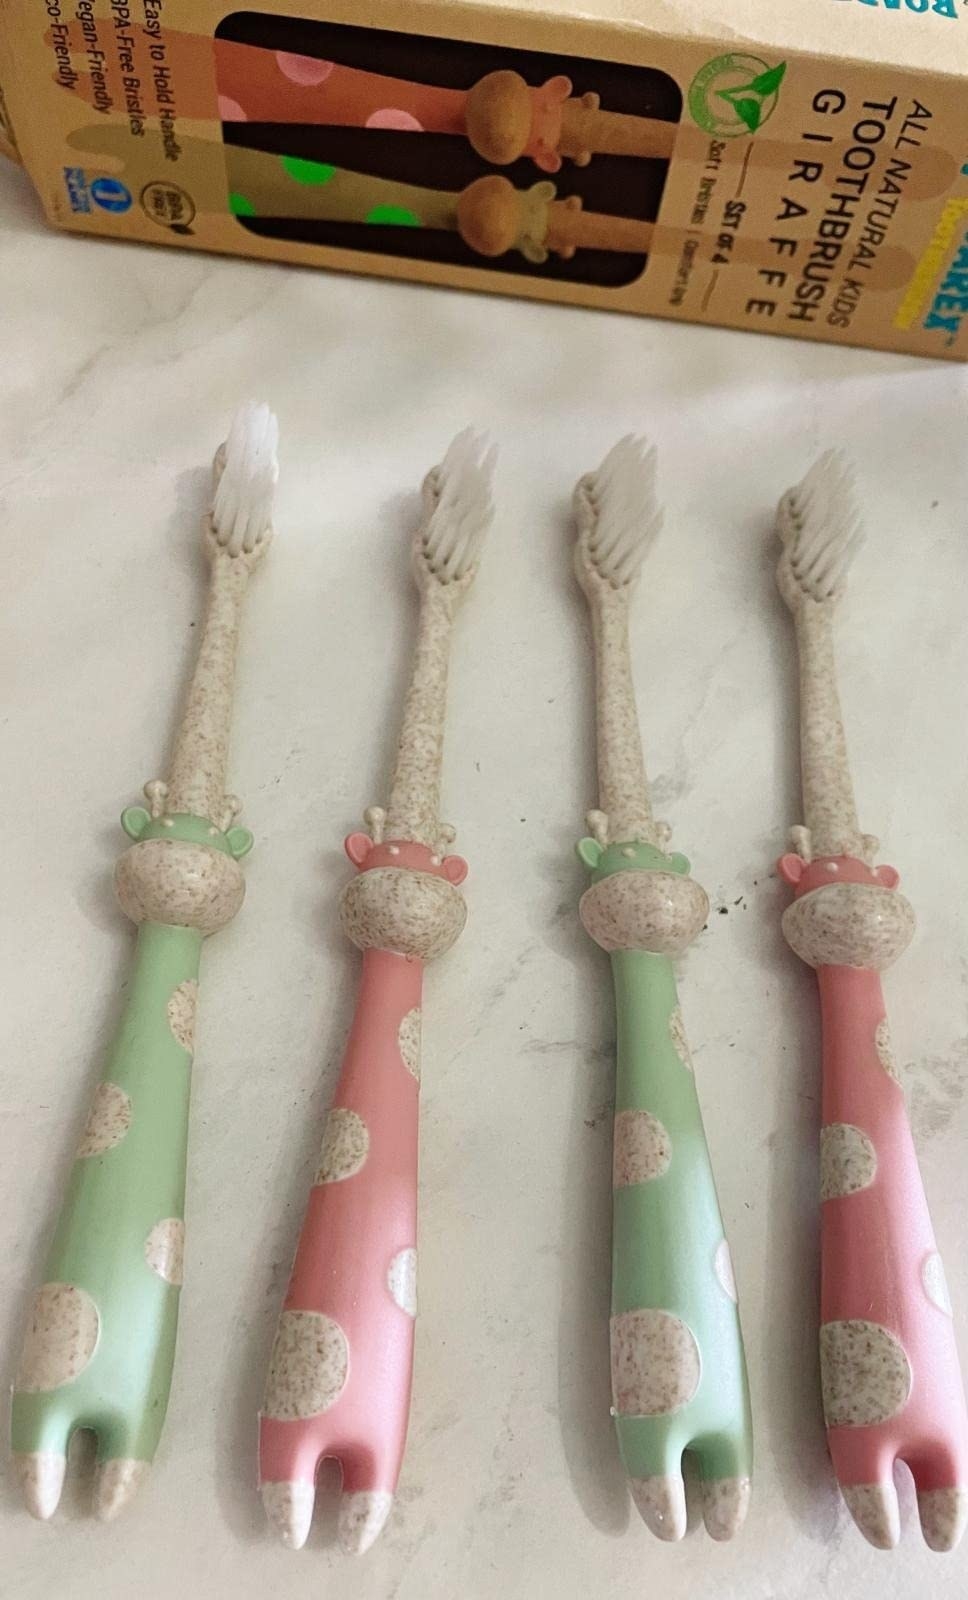 A user photo of the mint and pink toothbrushes